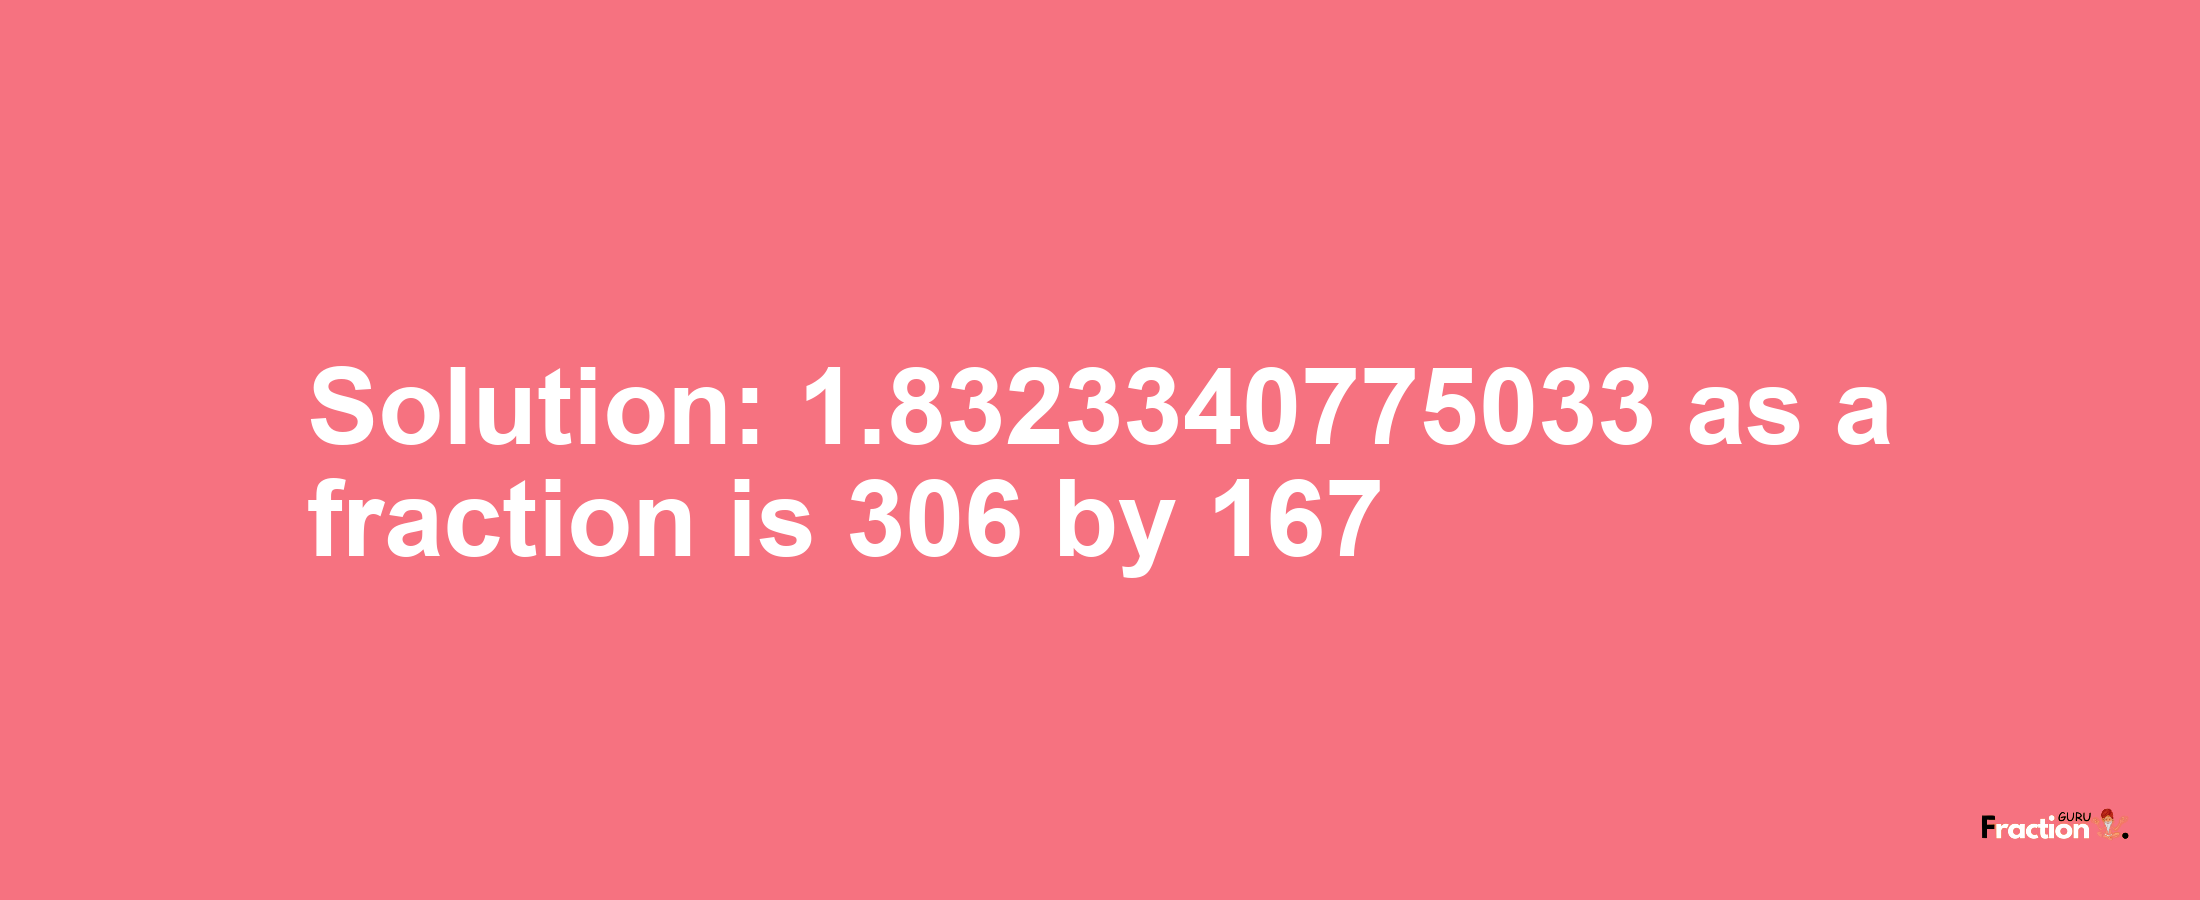 Solution:1.8323340775033 as a fraction is 306/167